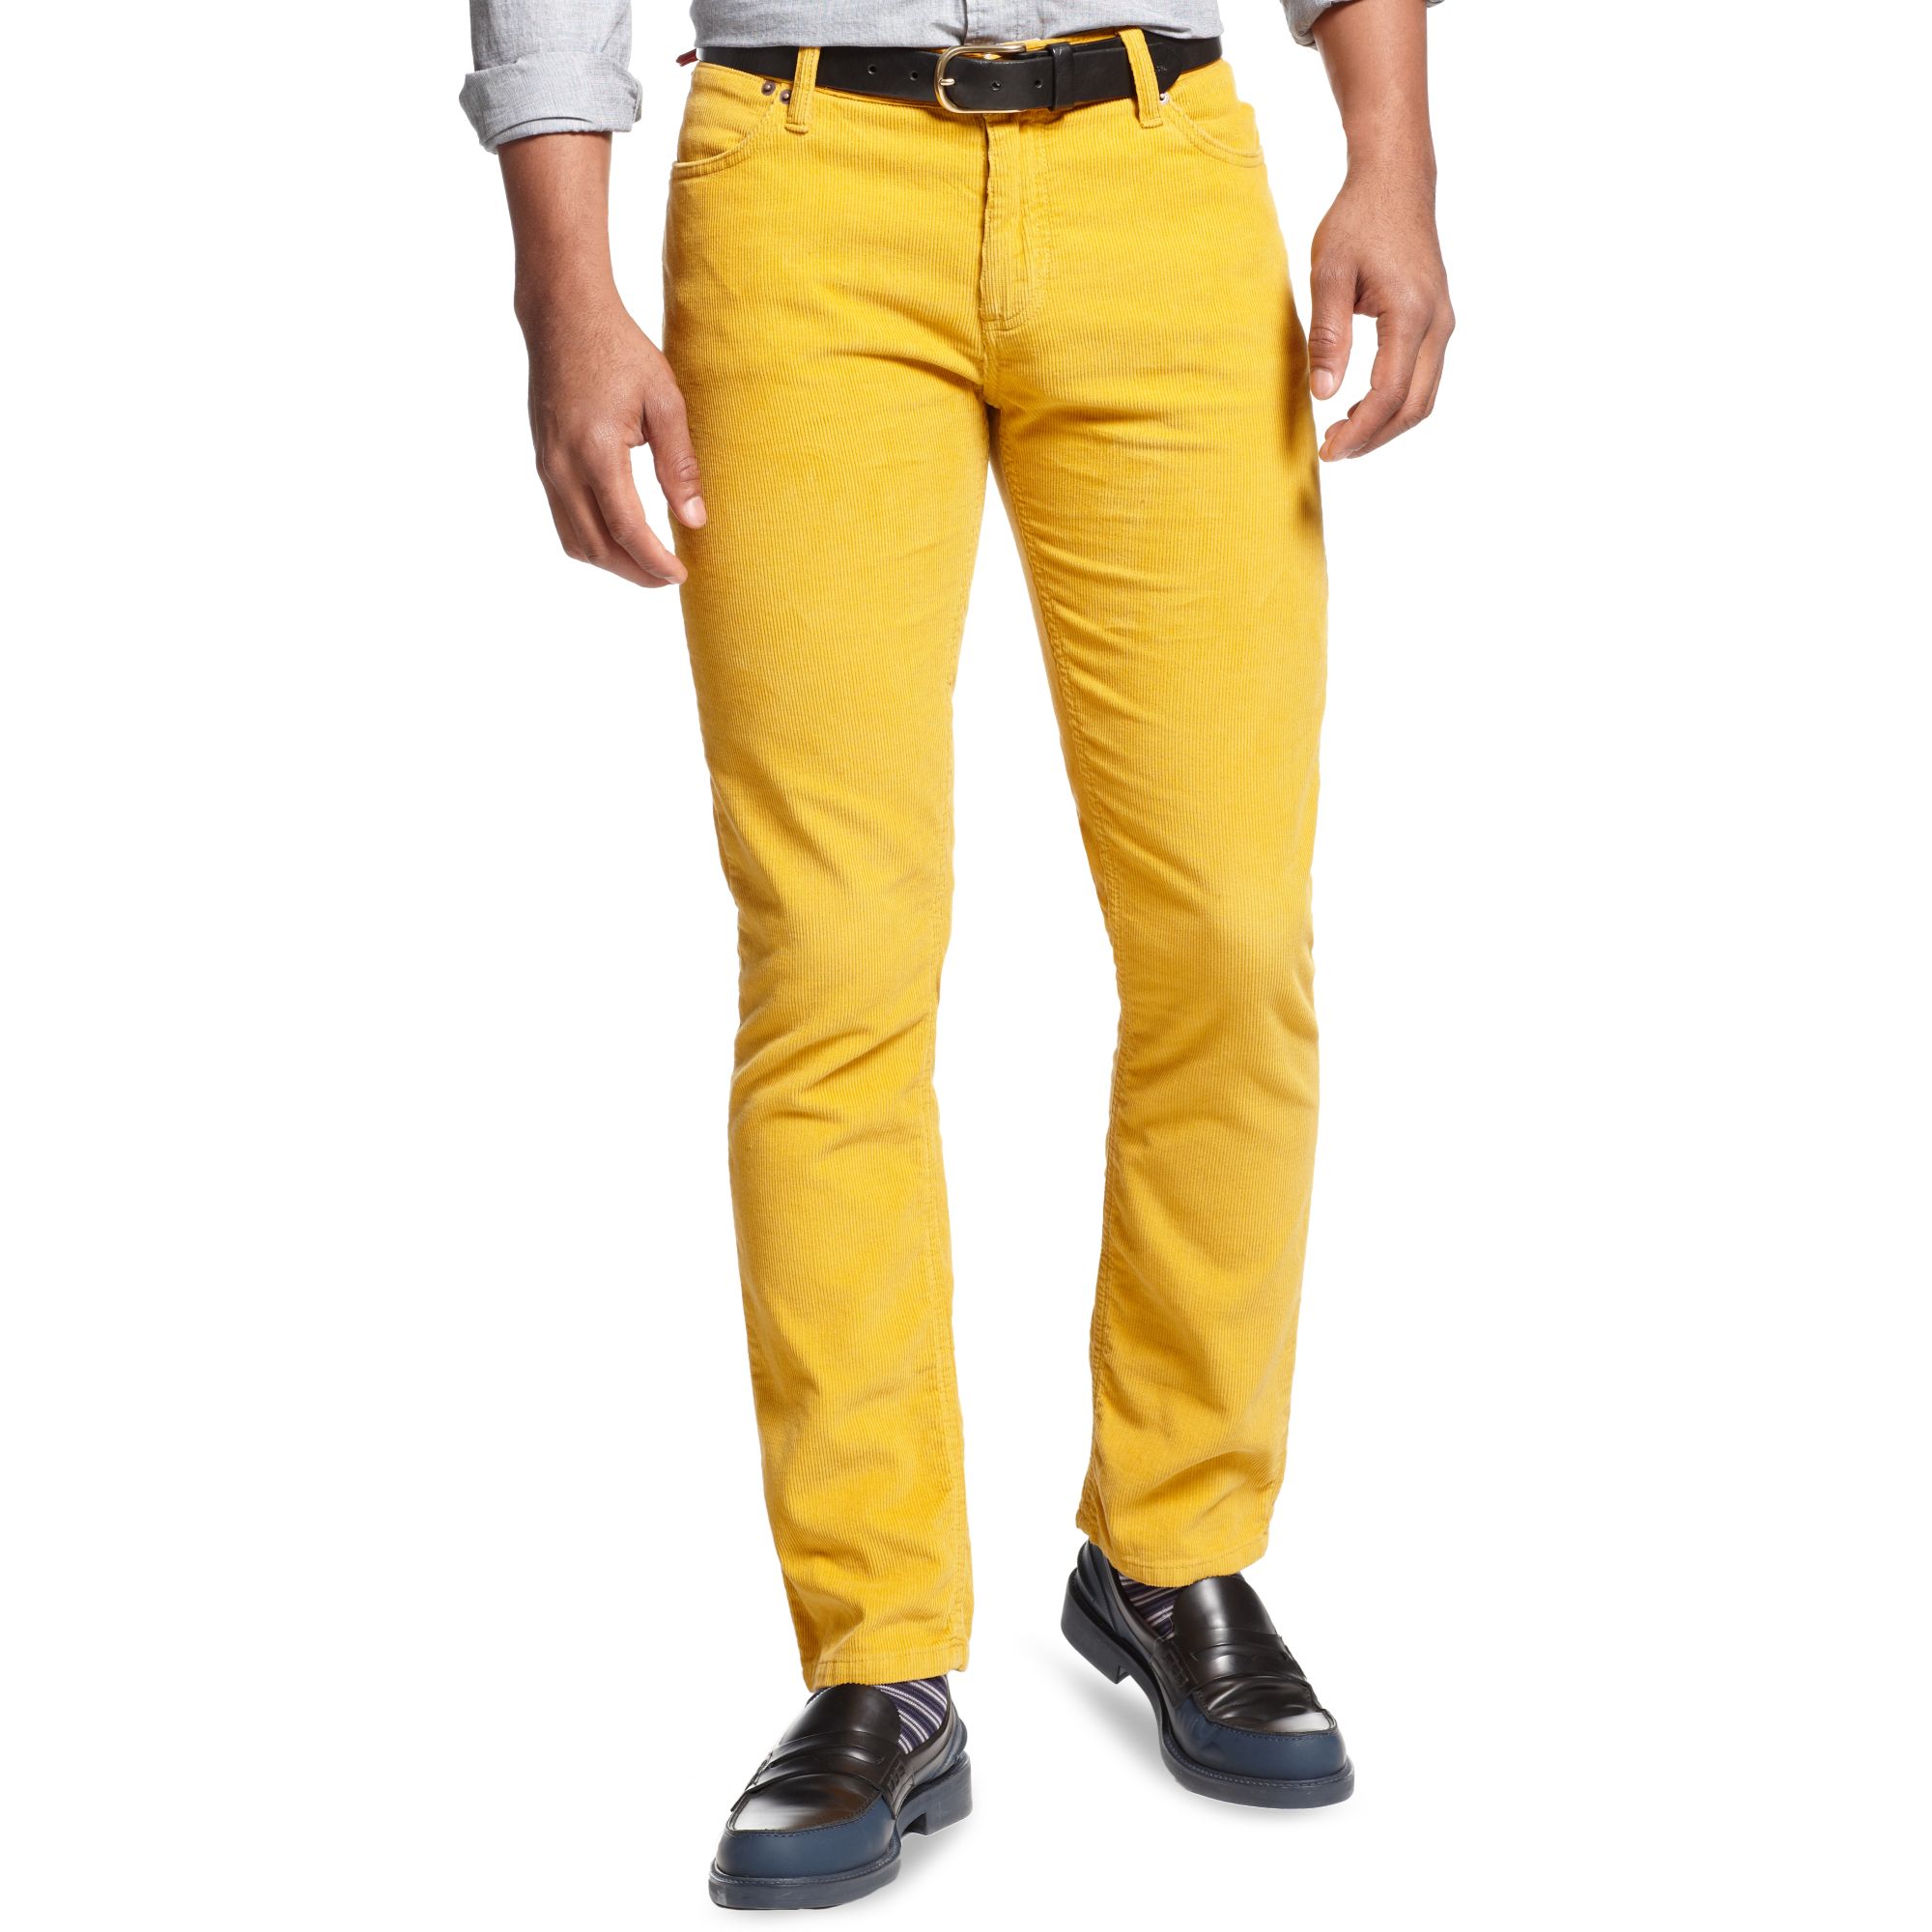 Tommy Hilfiger Yellow Pants Factory Sale, 55% OFF | www.smokymountains.org